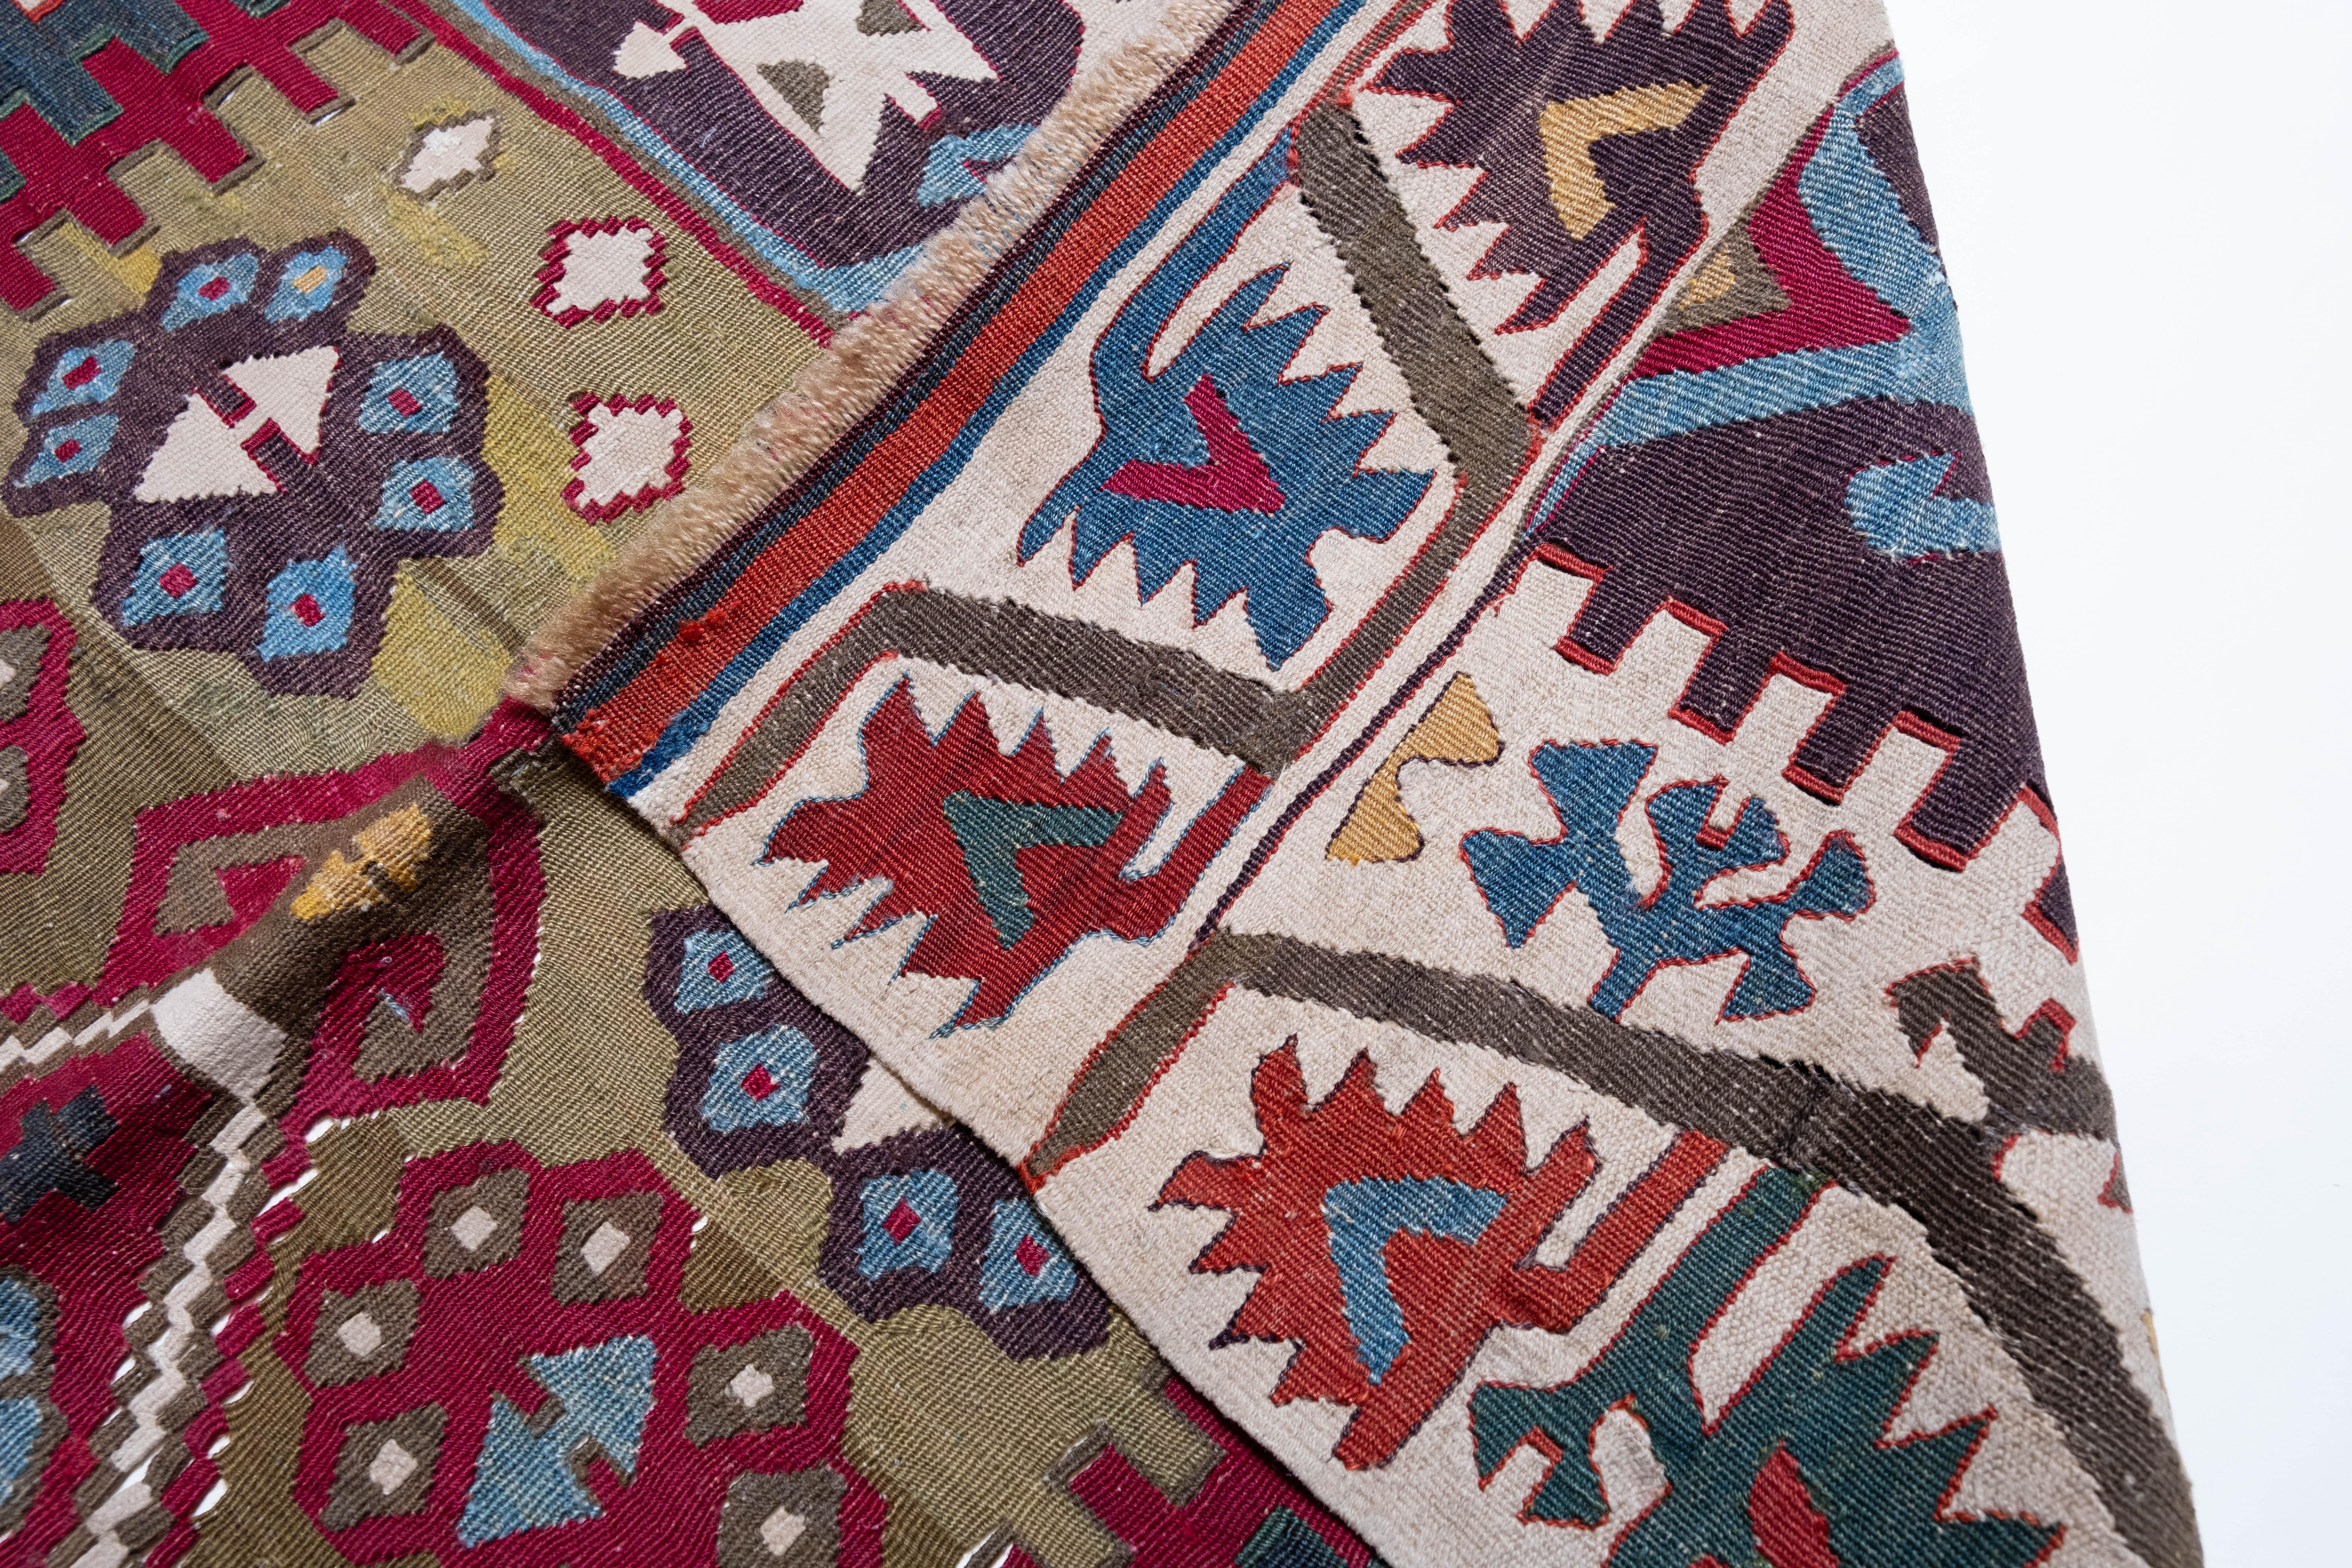 Hand-Woven Antique Aksaray Kilim Rug Wool Old Central Anatolian Turkish Carpet For Sale